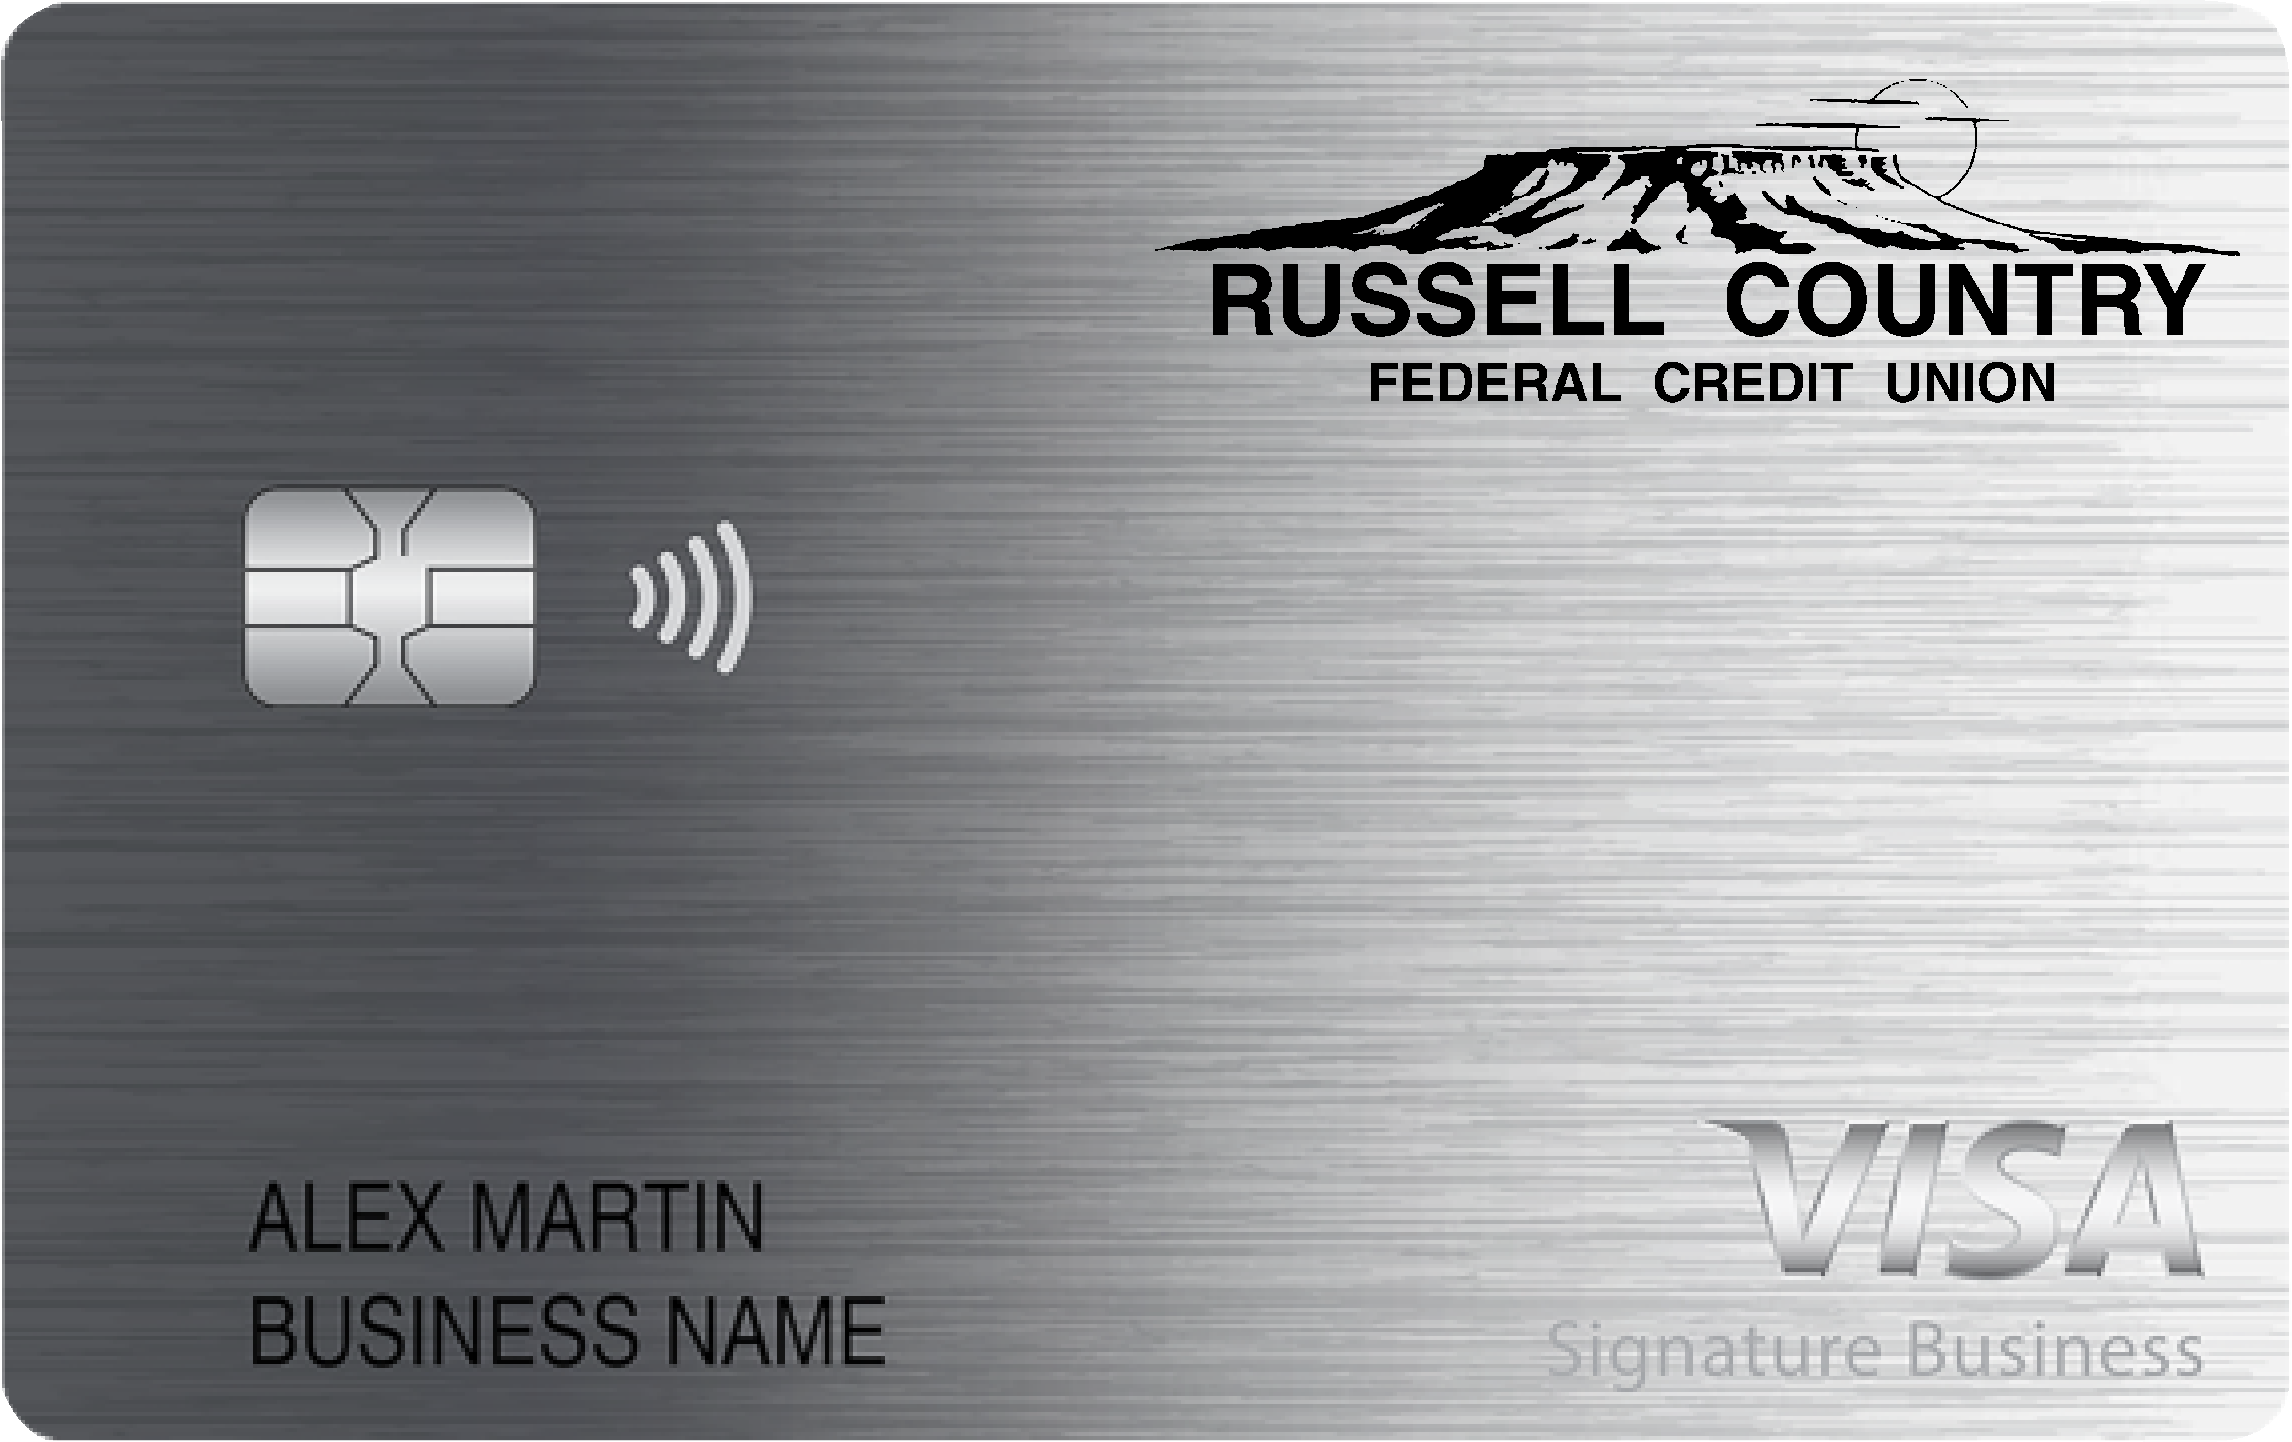 Russell Country Federal CU Smart Business Rewards Card